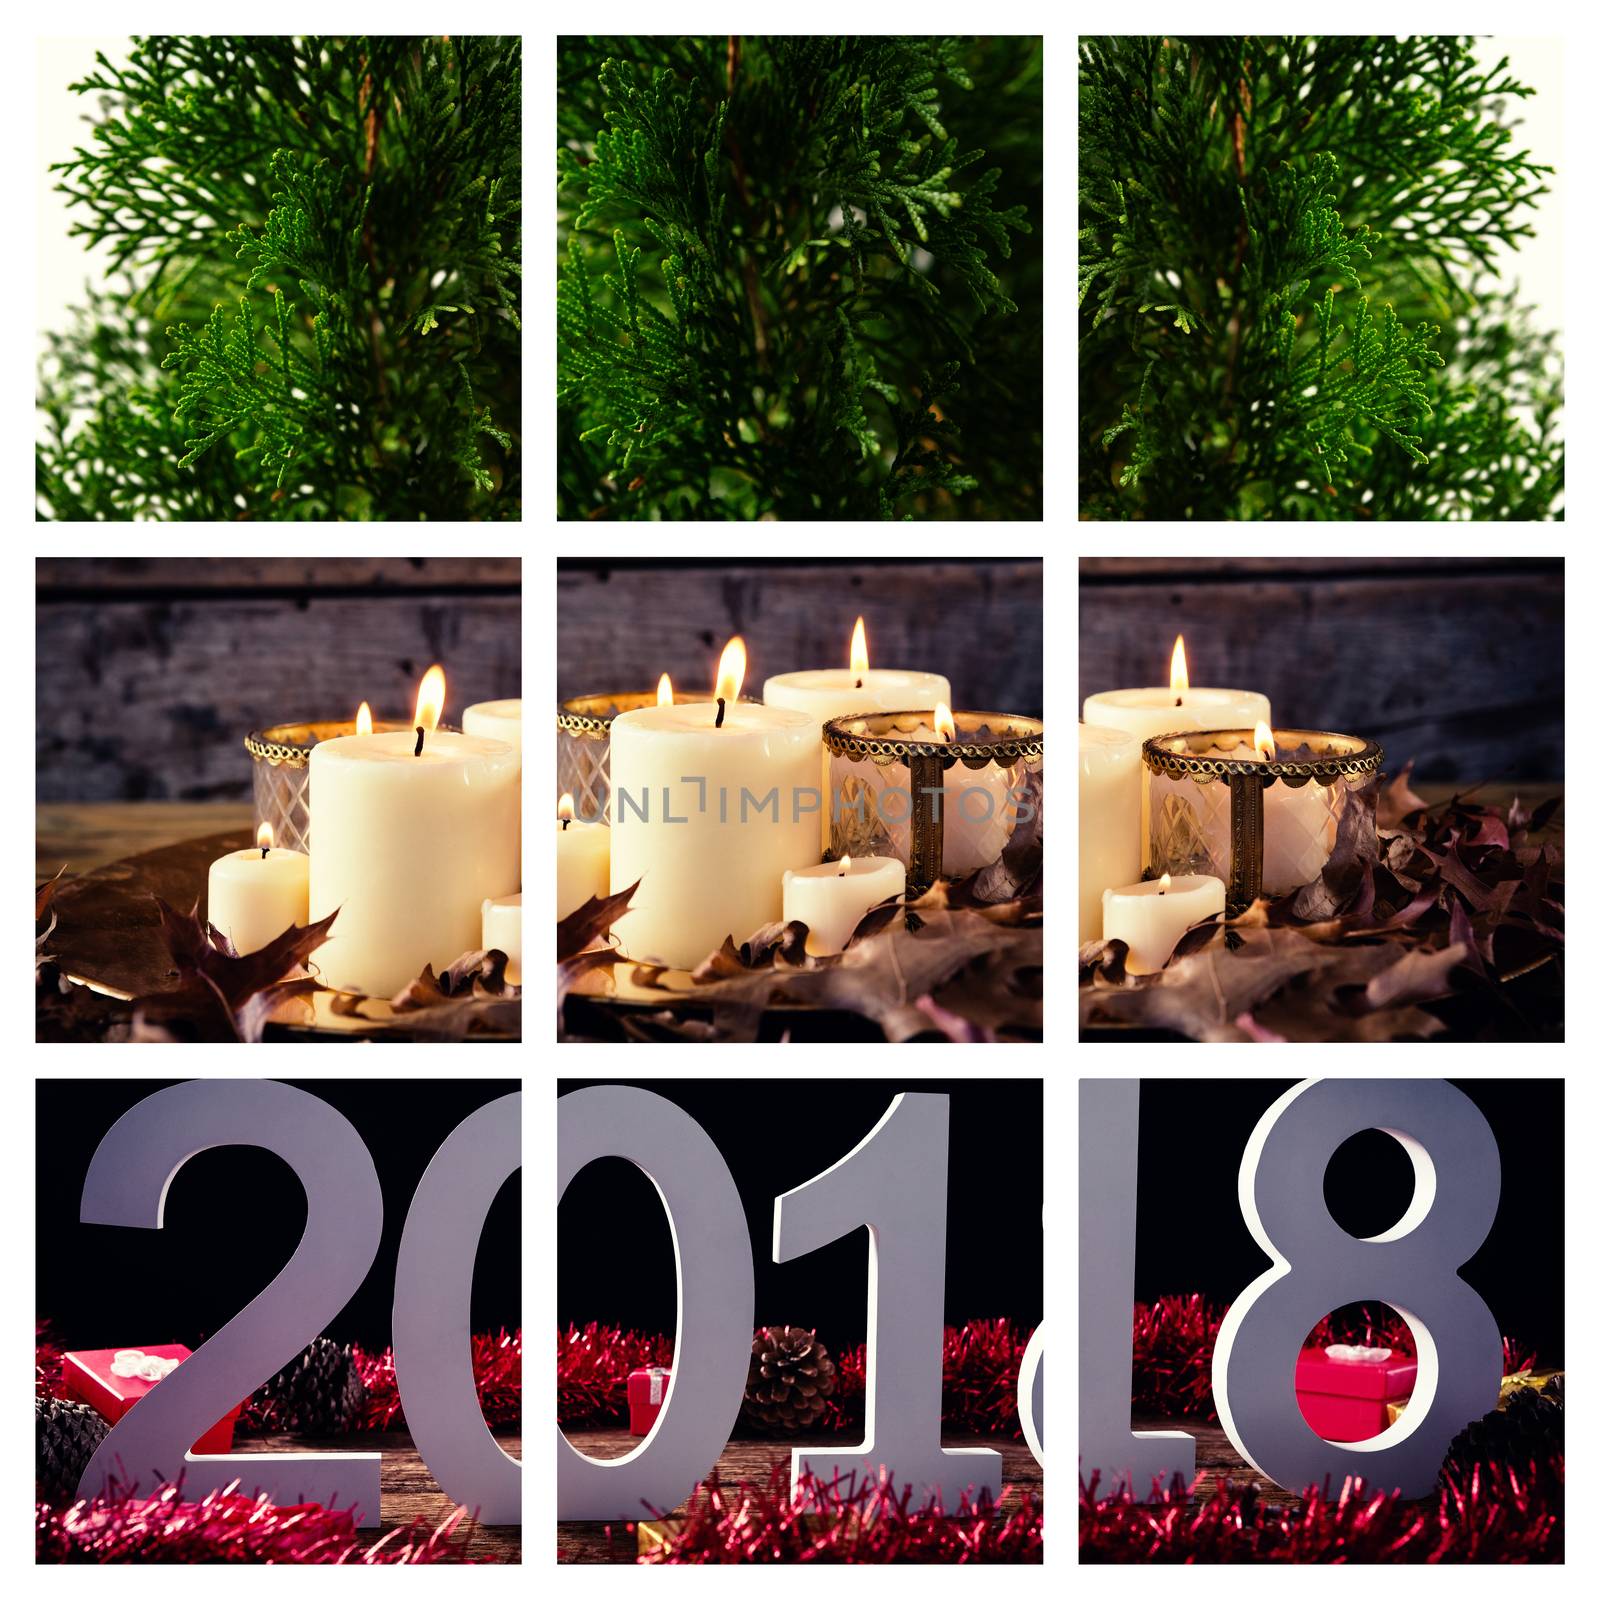 Christmas and new year collage by Wavebreakmedia